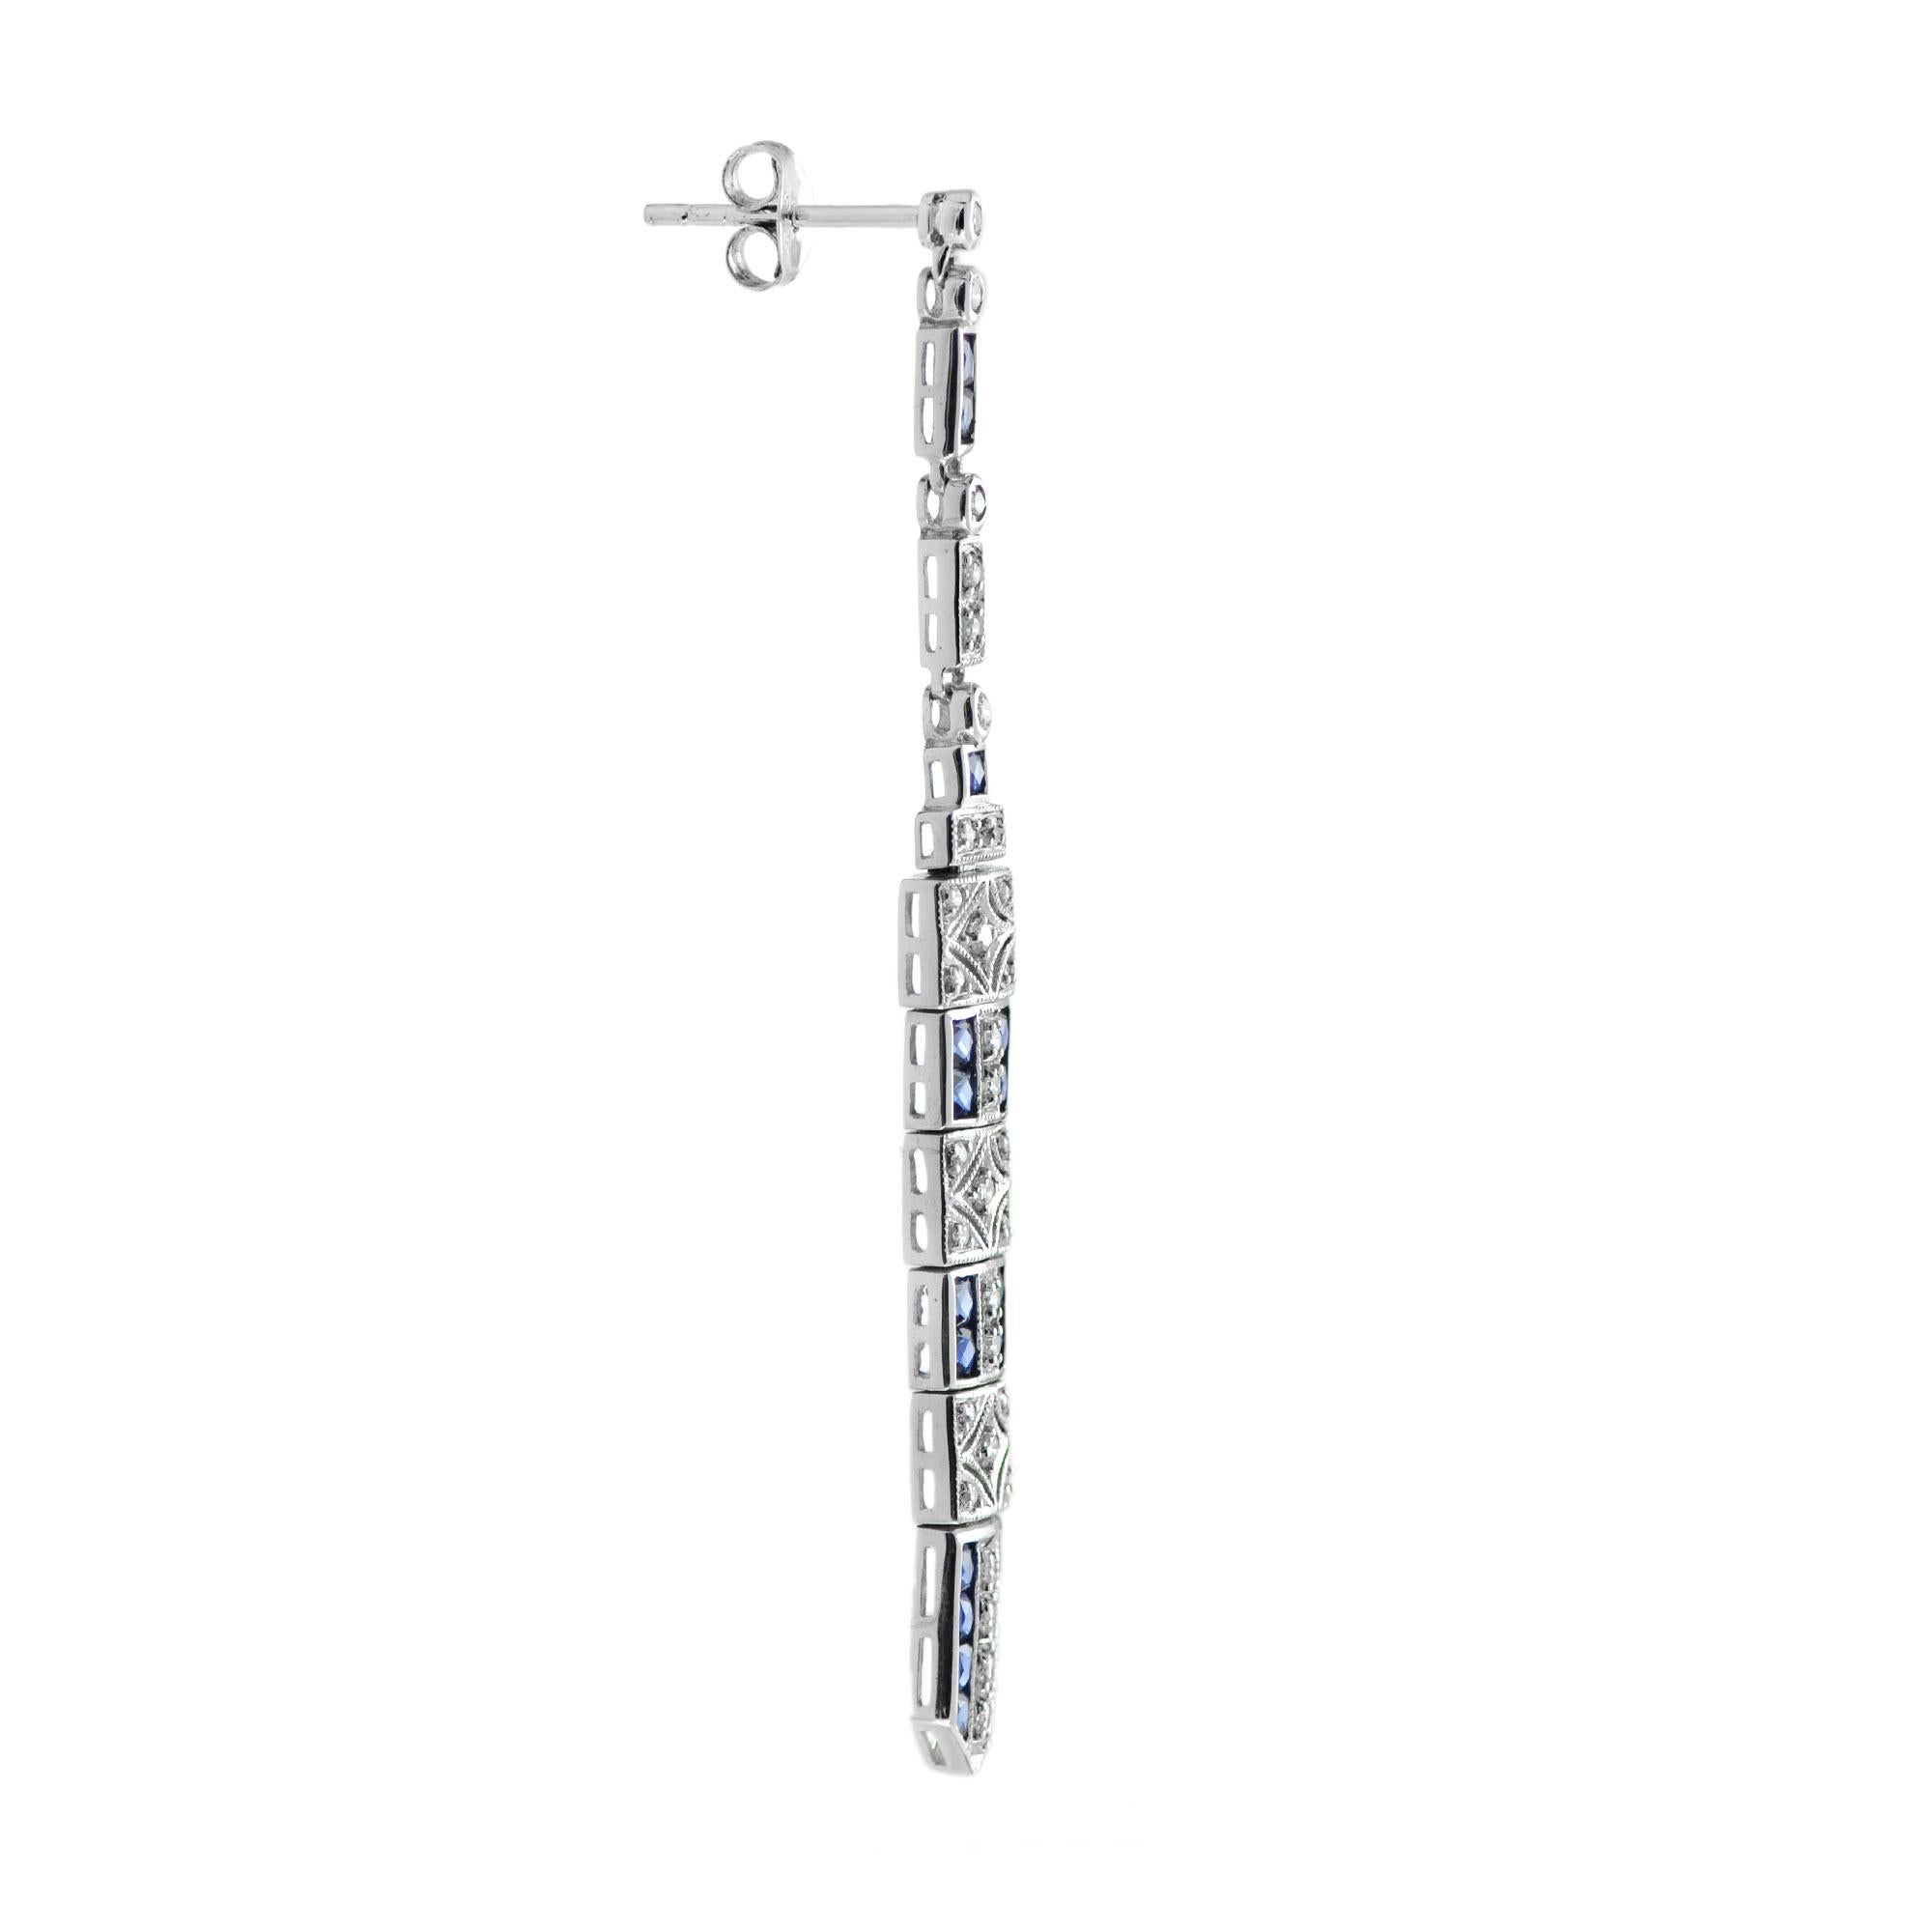 These art deco bar dangle earrings are the epitome of vintage inspired elegance featuring mesmerizing geometric patterns feature with sapphire and diamonds.

Information
Metal: 14K White Gold
Width: 6 mm.
Length: 62 mm.
Weight: 7.90 g. (approx.